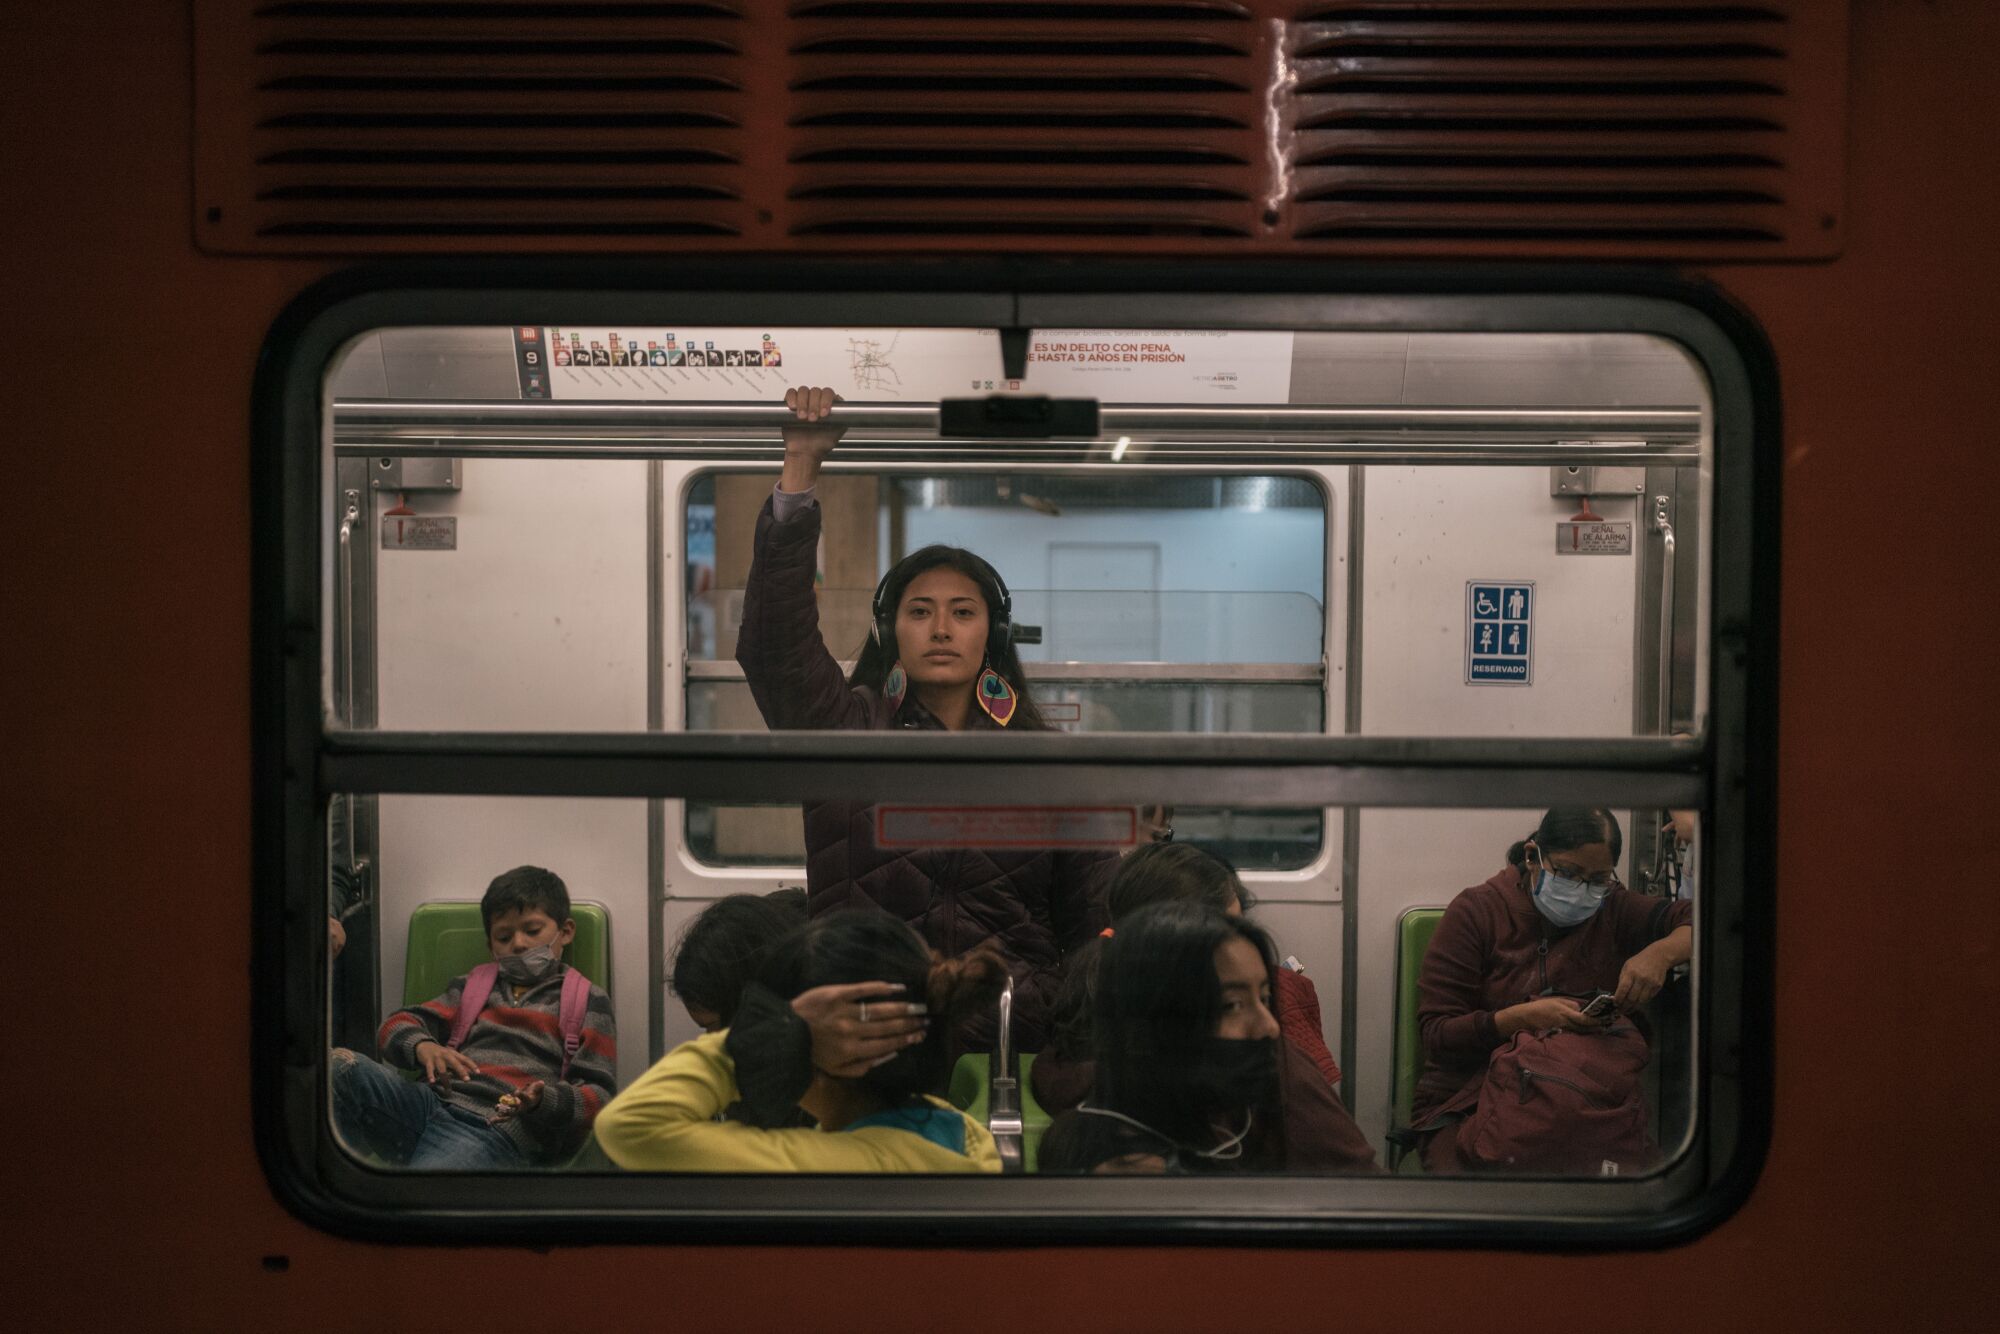 A woman holding onto a rail looks out from a subway train window